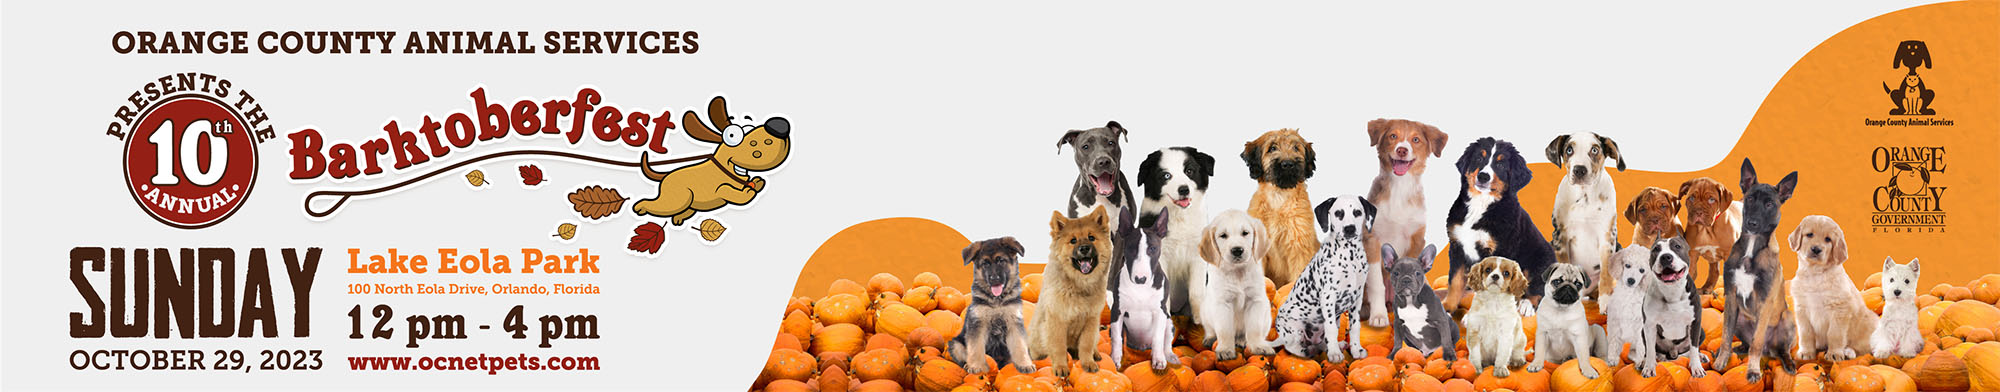 Orange County Animal Services 9th Annual Barktoberfest - Sunday November 20, 2022 - Lake Eola Park 12pm - 4pm - 100 North Eola Drive Orlando, FL - Dozens of rescue oets available for adoption - Free rabies vaccinations and microchipping - Food Trucks